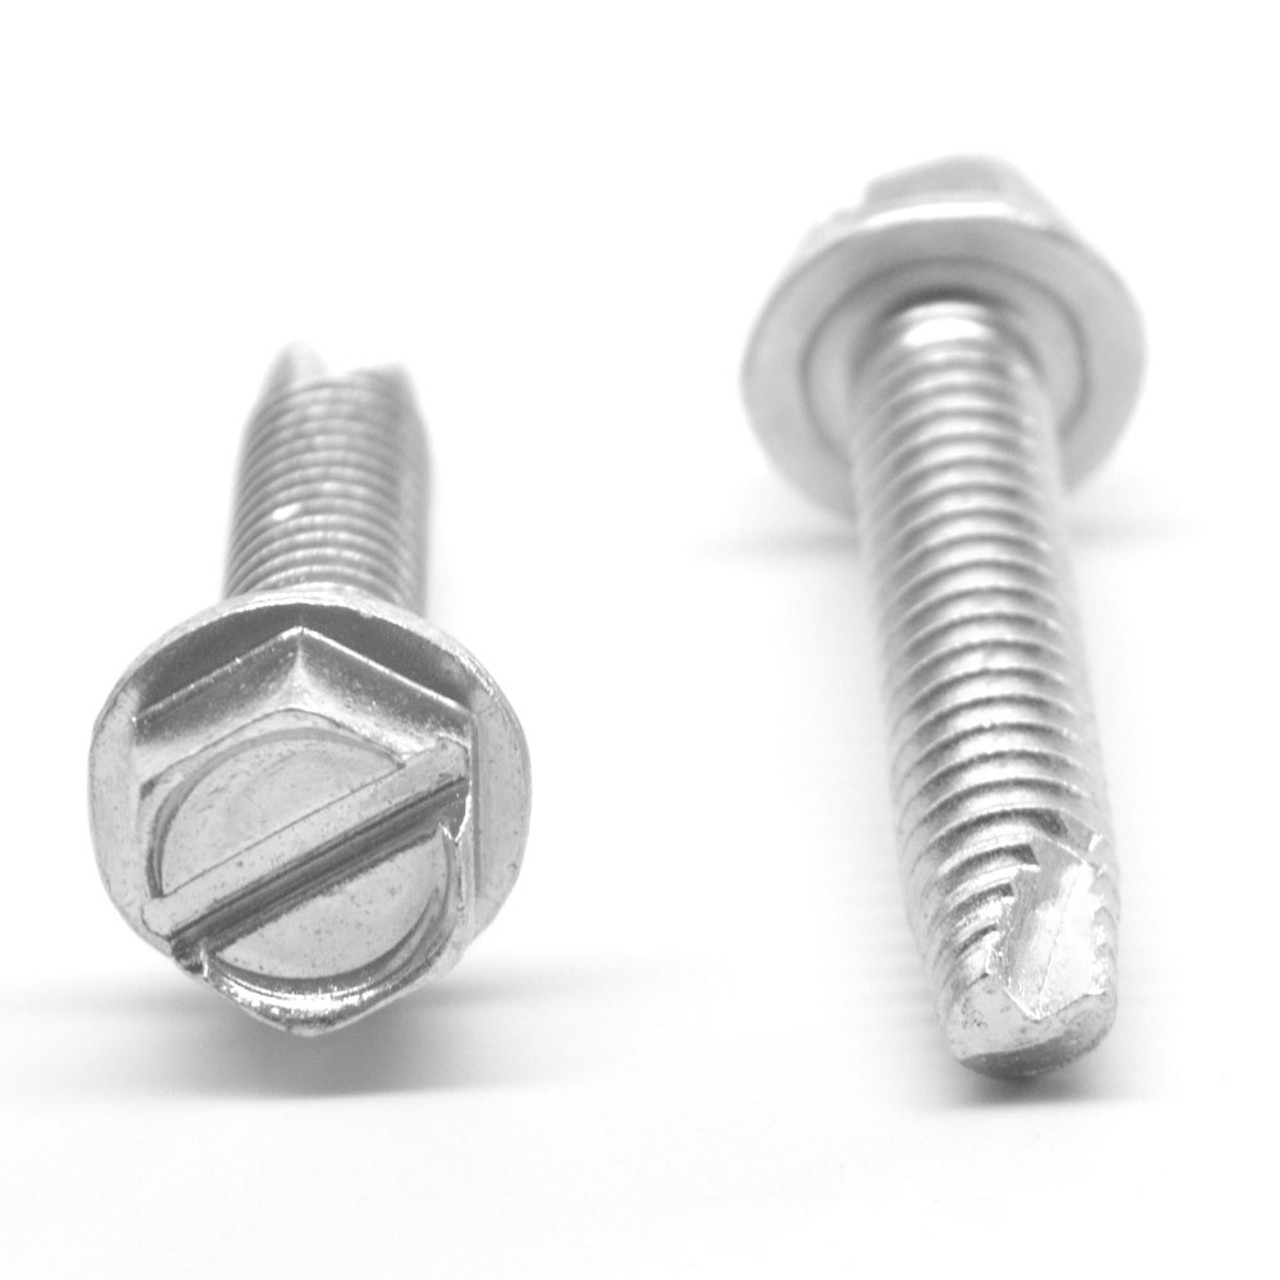 5/16-18 x 1/2 Coarse Thread Thread Cutting Screw Slotted Hex Washer Head Type 23 Low Carbon Steel Zinc Plated